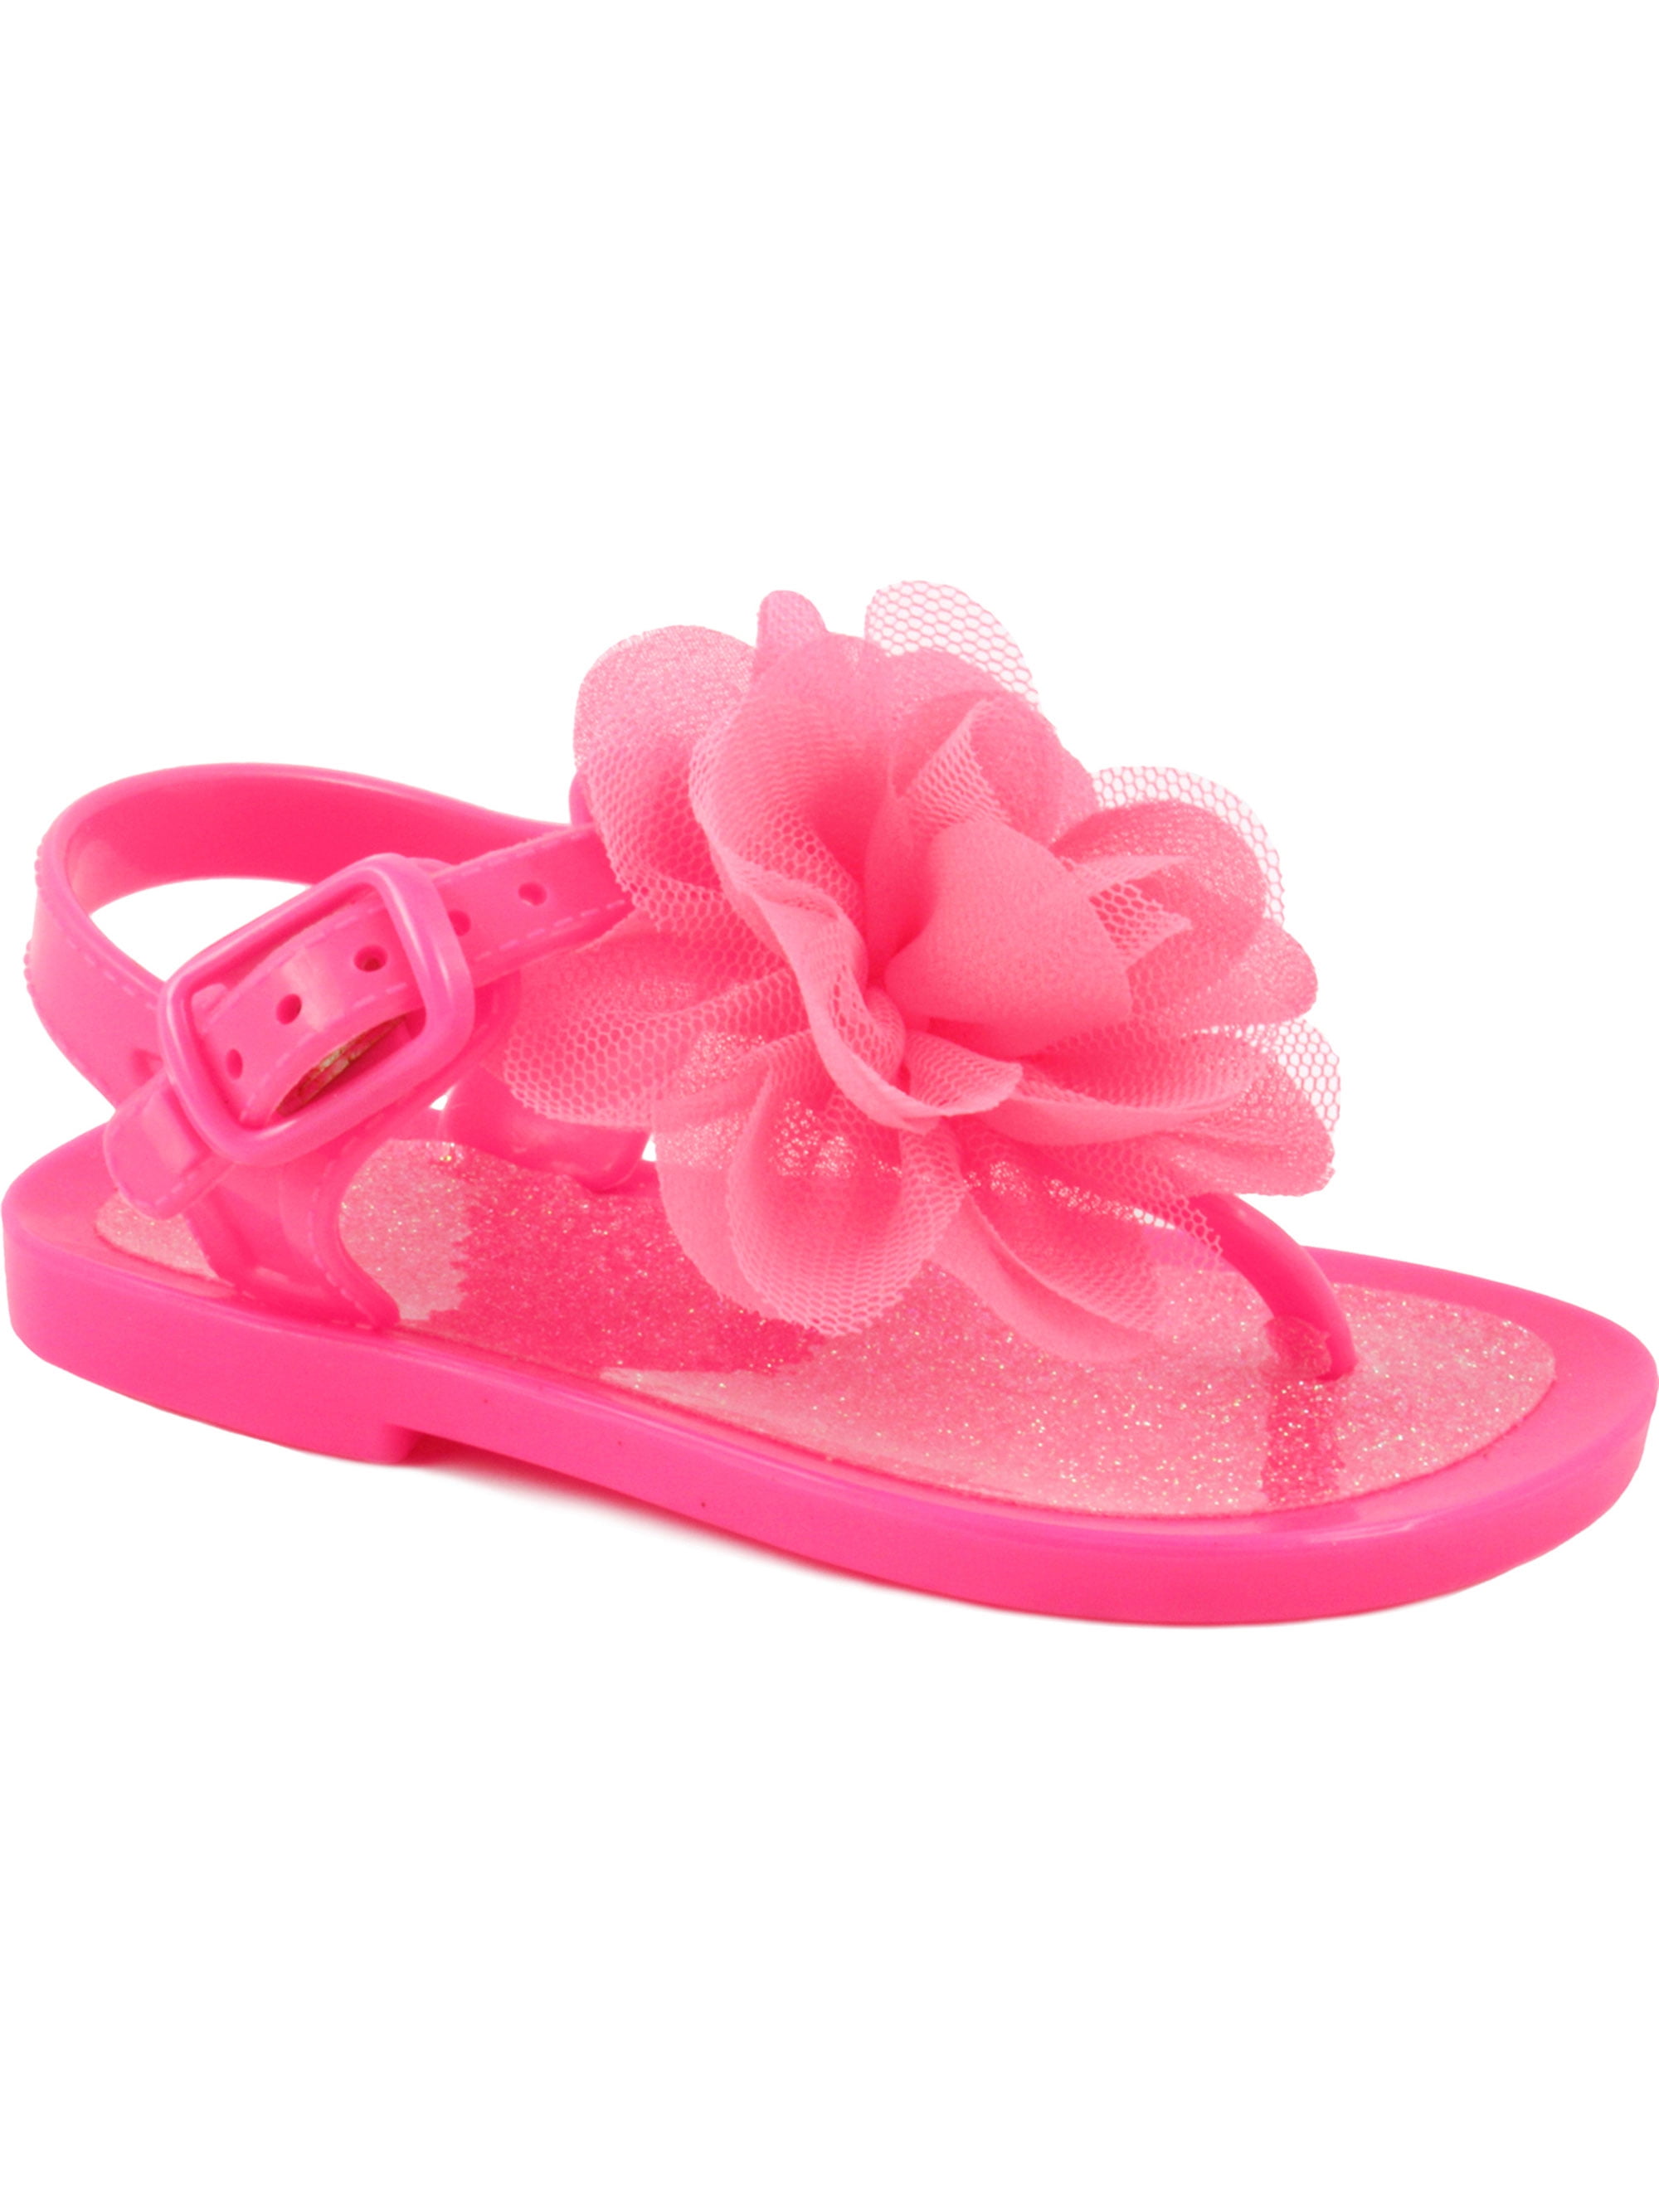 Wee Kids Baby-Girls Sandals Jelly Shoes 